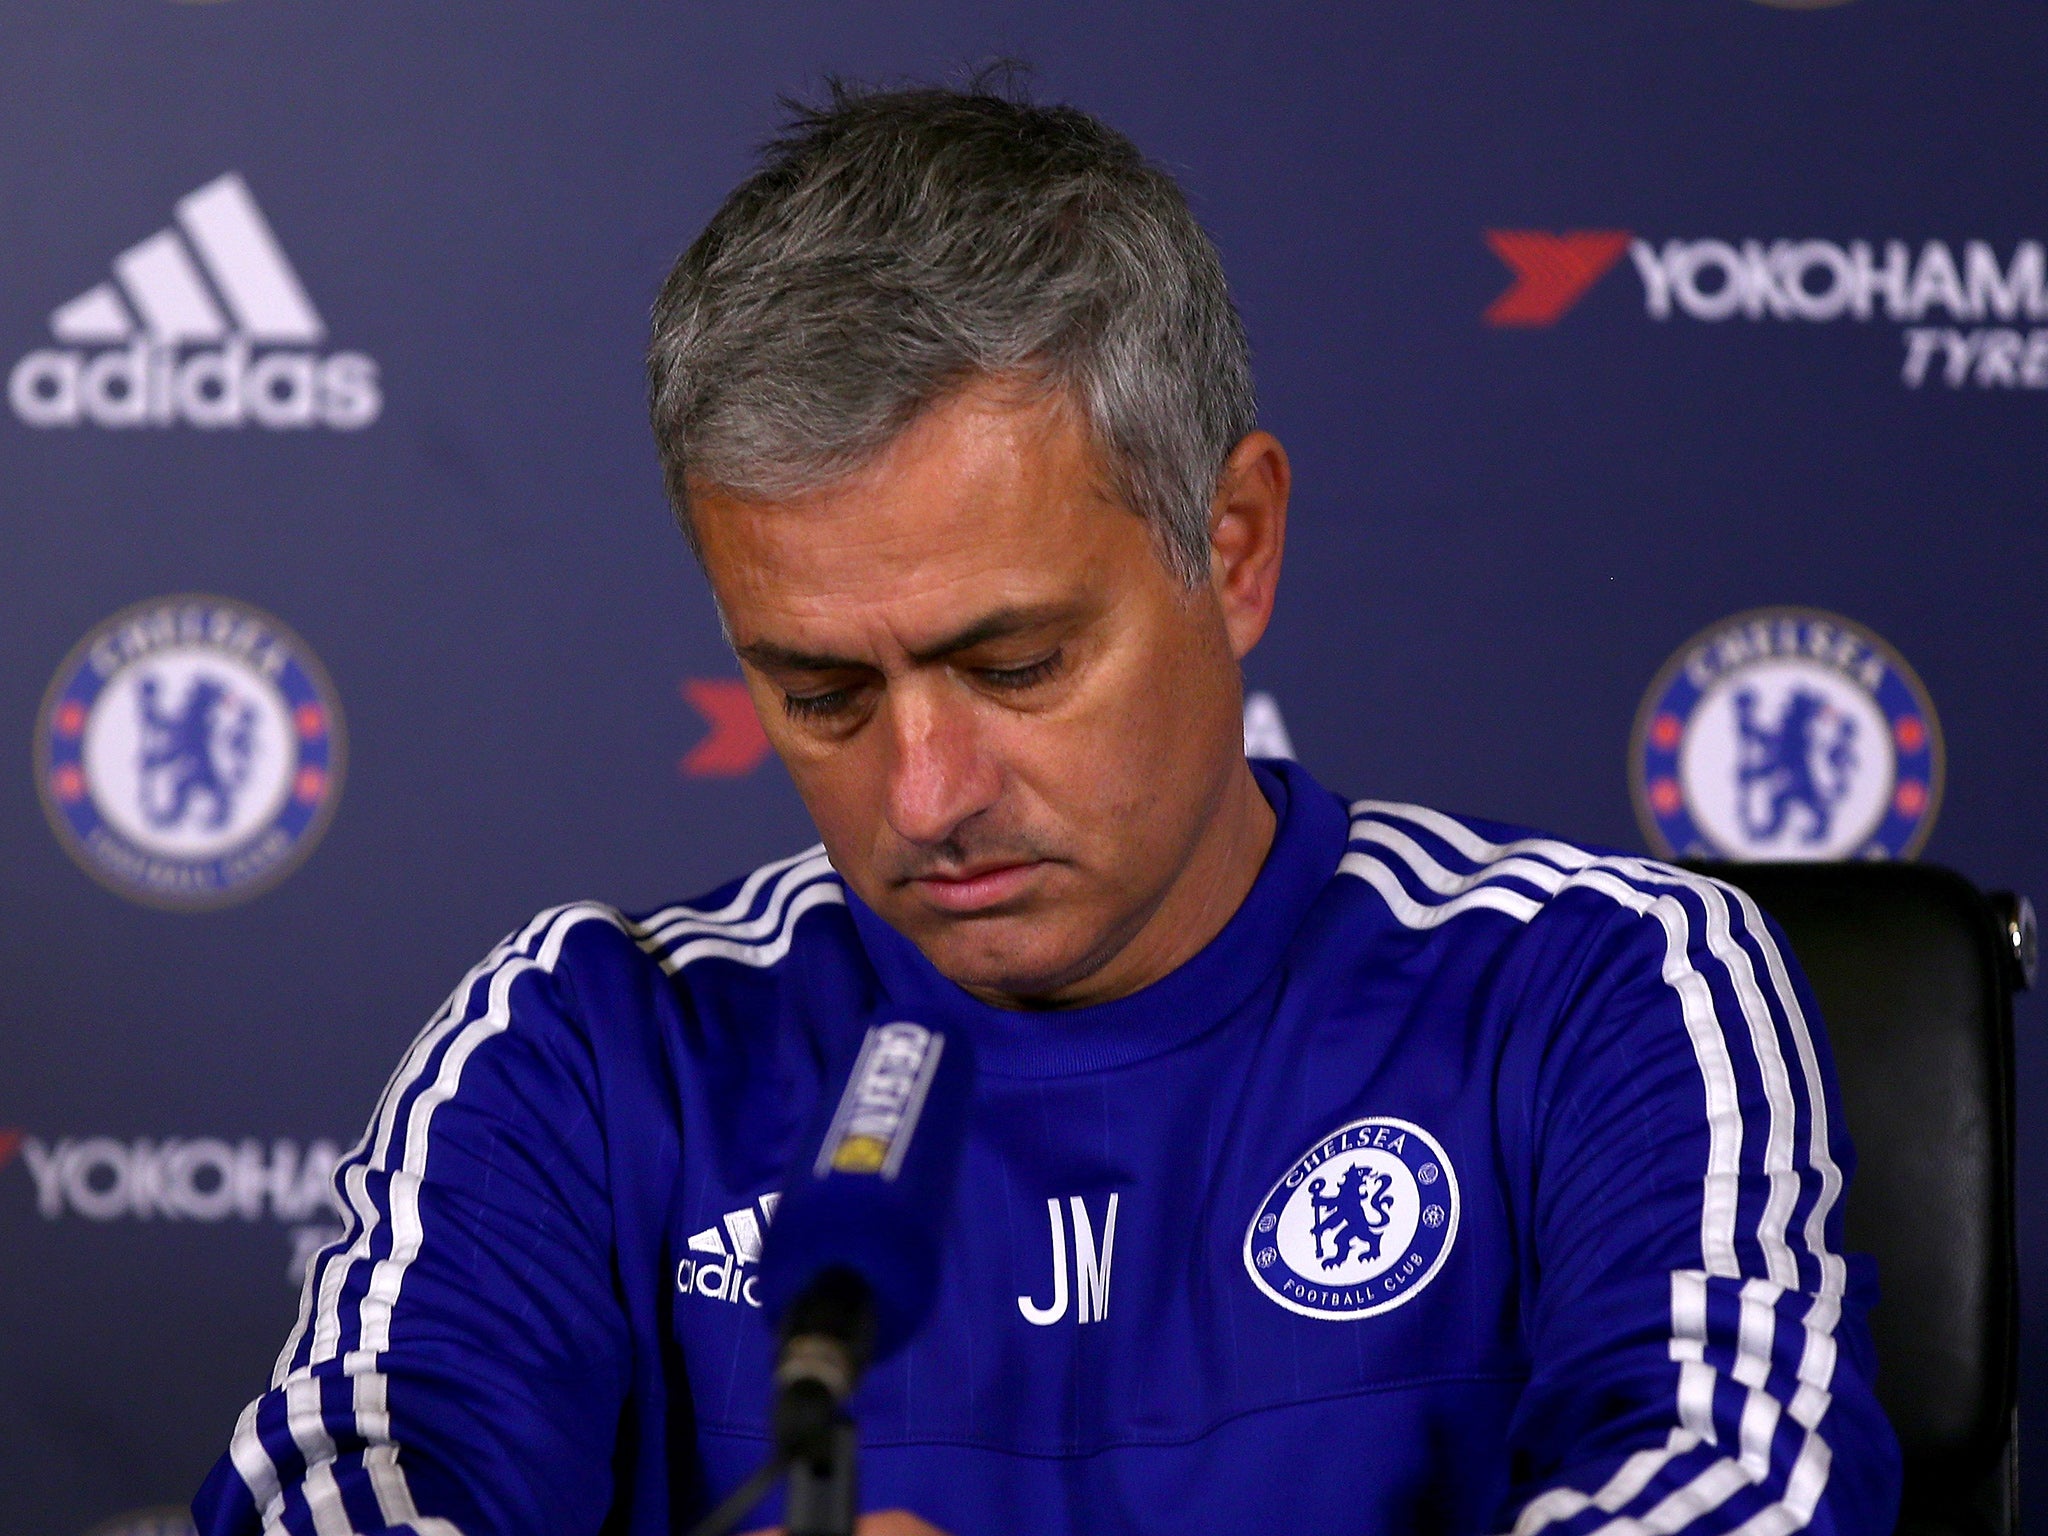 Former manager Jose Mourinho must take a portion of the blame for Chelsea's poor decisions on personnel